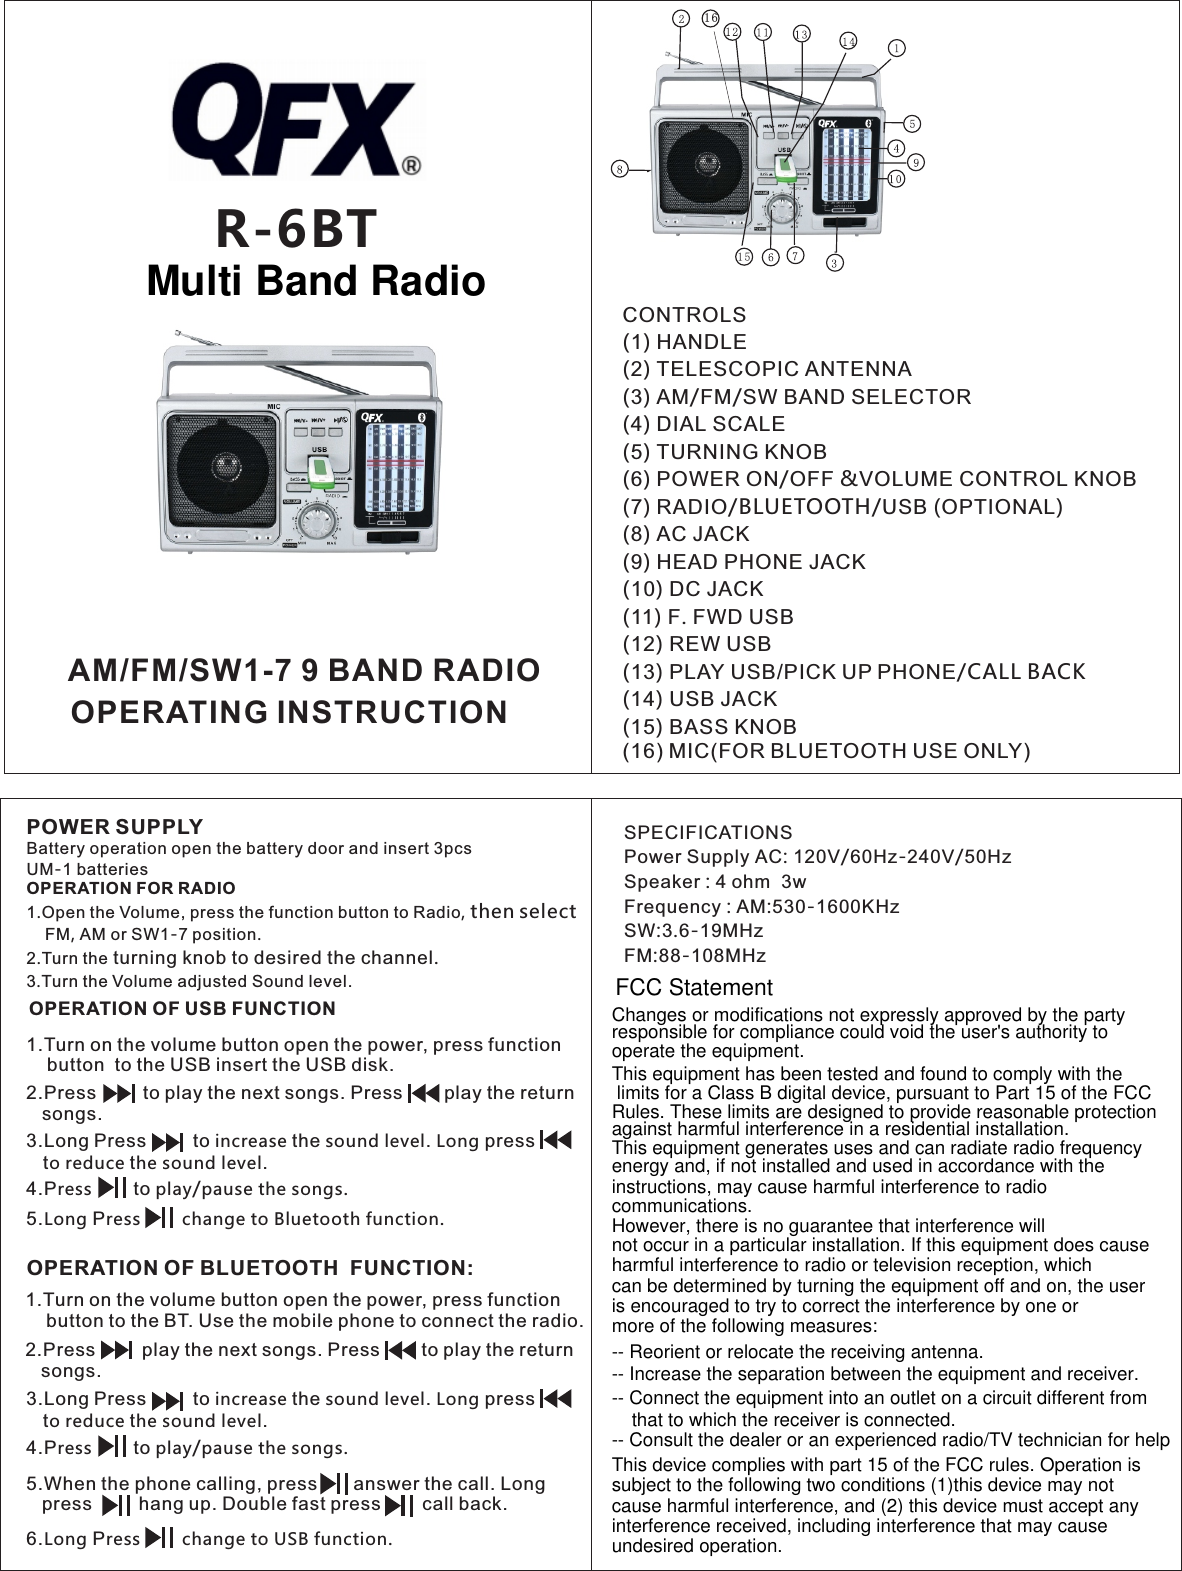 R-6BTOPERATION OF USB FUNCTION1.Turn on the volume button open the power, press function     button  to the USB insert the USB disk. OPERATION OF BLUETOOTH  FUNCTION:CONTROLS (1) HANDLE(2) TELESCOPIC ANTENNA(3) AM/FM/SW BAND SELECTOR(4) DIAL SCALE(5) TURNING KNOB(6) POWER ON/OFF &amp;VOLUME CONTROL KNOB(7) RADIO/BLUETOOTH/USB (OPTIONAL)(8) AC JACK(9) HEAD PHONE JACK(10) DC JACK(11) F. FWD USB(12) REW USB(13) PLAY USB/PICK UP PHONE/CALL BACK (14) USB JACK (15) BASS KNOB(16) MIC(FOR BLUETOOTH USE ONLY)POWER SUPPLYBattery operation open the battery door and insert 3pcs UM-1 batteries OPERATION FOR RADIO1.Open the Volume, press the function button to Radio, then select      FM, AM or SW1-7 position. 2.Turn the turning knob to desired the channel. 3.Turn the Volume adjusted Sound level.SPECIFICATIONSPower Supply AC: 120V/60Hz-240V/50HzSpeaker : 4 ohm  3wFrequency : AM:530-1600KHzSW:3.6-19MHzFM:88-108MHz1 62.Press         to play the next songs. Press        play the return   songs.3.Long Press         to increase the sound level. Long press           to reduce the sound level.4.Press        to play/pause the songs.     3.Long Press         to increase the sound level. Long press           to reduce the sound level.4.Press        to play/pause the songs.     5.When the phone calling, press       answer the call. Long    press         hang up. Double fast press        call back.5.Long Press        change to Bluetooth function.    6.Long Press        change to USB function.    AM/FM/SW1-7 9 BAND RADIOOPERATING INSTRUCTION//1.Turn on the volume button open the power, press function     button to the BT. Use the mobile phone to connect the radio.  2.Press         play the next songs. Press        to play the return   songs. Changes or modifications not expressly approved by the partyresponsible for compliance could void the user&apos;s authority tooperate the equipment.This equipment has been tested and found to comply with the  limits for a Class B digital device, pursuant to Part 15 of the FCC Rules. These limits are designed to provide reasonable protectionagainst harmful interference in a residential installation. This equipment generates uses and can radiate radio frequency energy and, if not installed and used in accordance with theinstructions, may cause harmful interference to radio communications.However, there is no guarantee that interference will not occur in a particular installation. If this equipment does causeharmful interference to radio or television reception, which can be determined by turning the equipment off and on, the useris encouraged to try to correct the interference by one or more of the following measures:-- Reorient or relocate the receiving antenna.-- Increase the separation between the equipment and receiver.-- Connect the equipment into an outlet on a circuit different fromthat to which the receiver is connected.-- Consult the dealer or an experienced radio/TV technician for helpThis device complies with part 15 of the FCC rules. Operation is subject to the following two conditions (1)this device may not cause harmful interference, and (2) this device must accept anyinterference received, including interference that may cause undesired operation.FCC StatementMulti Band Radio